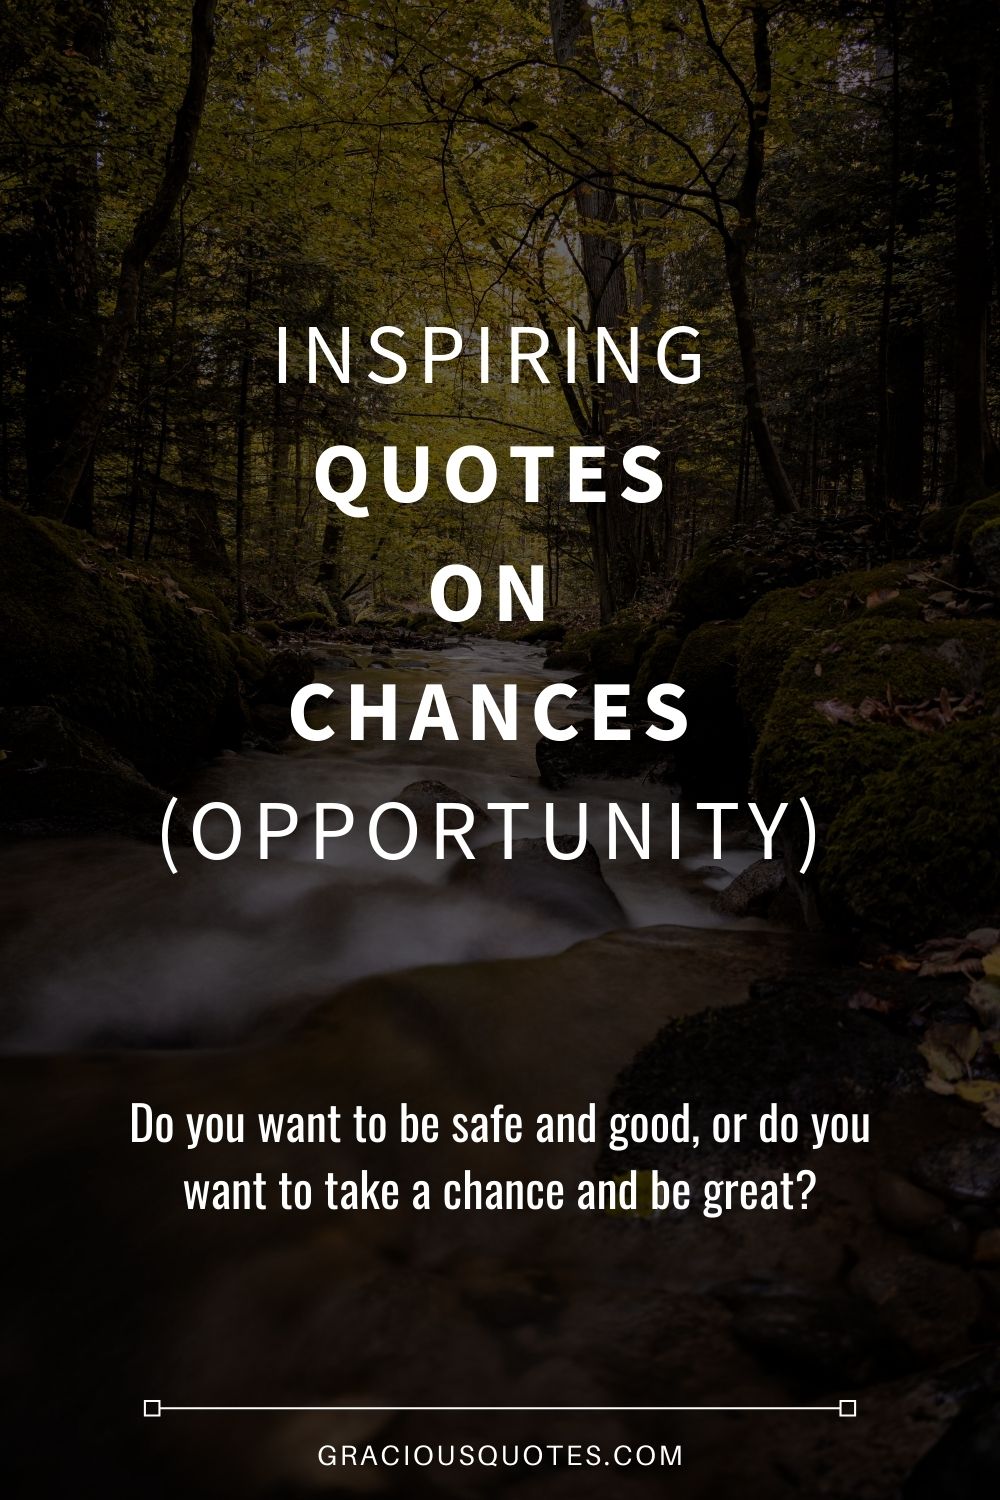 Inspiring Quotes on Chances (OPPORTUNITY) - Gracious Quotes